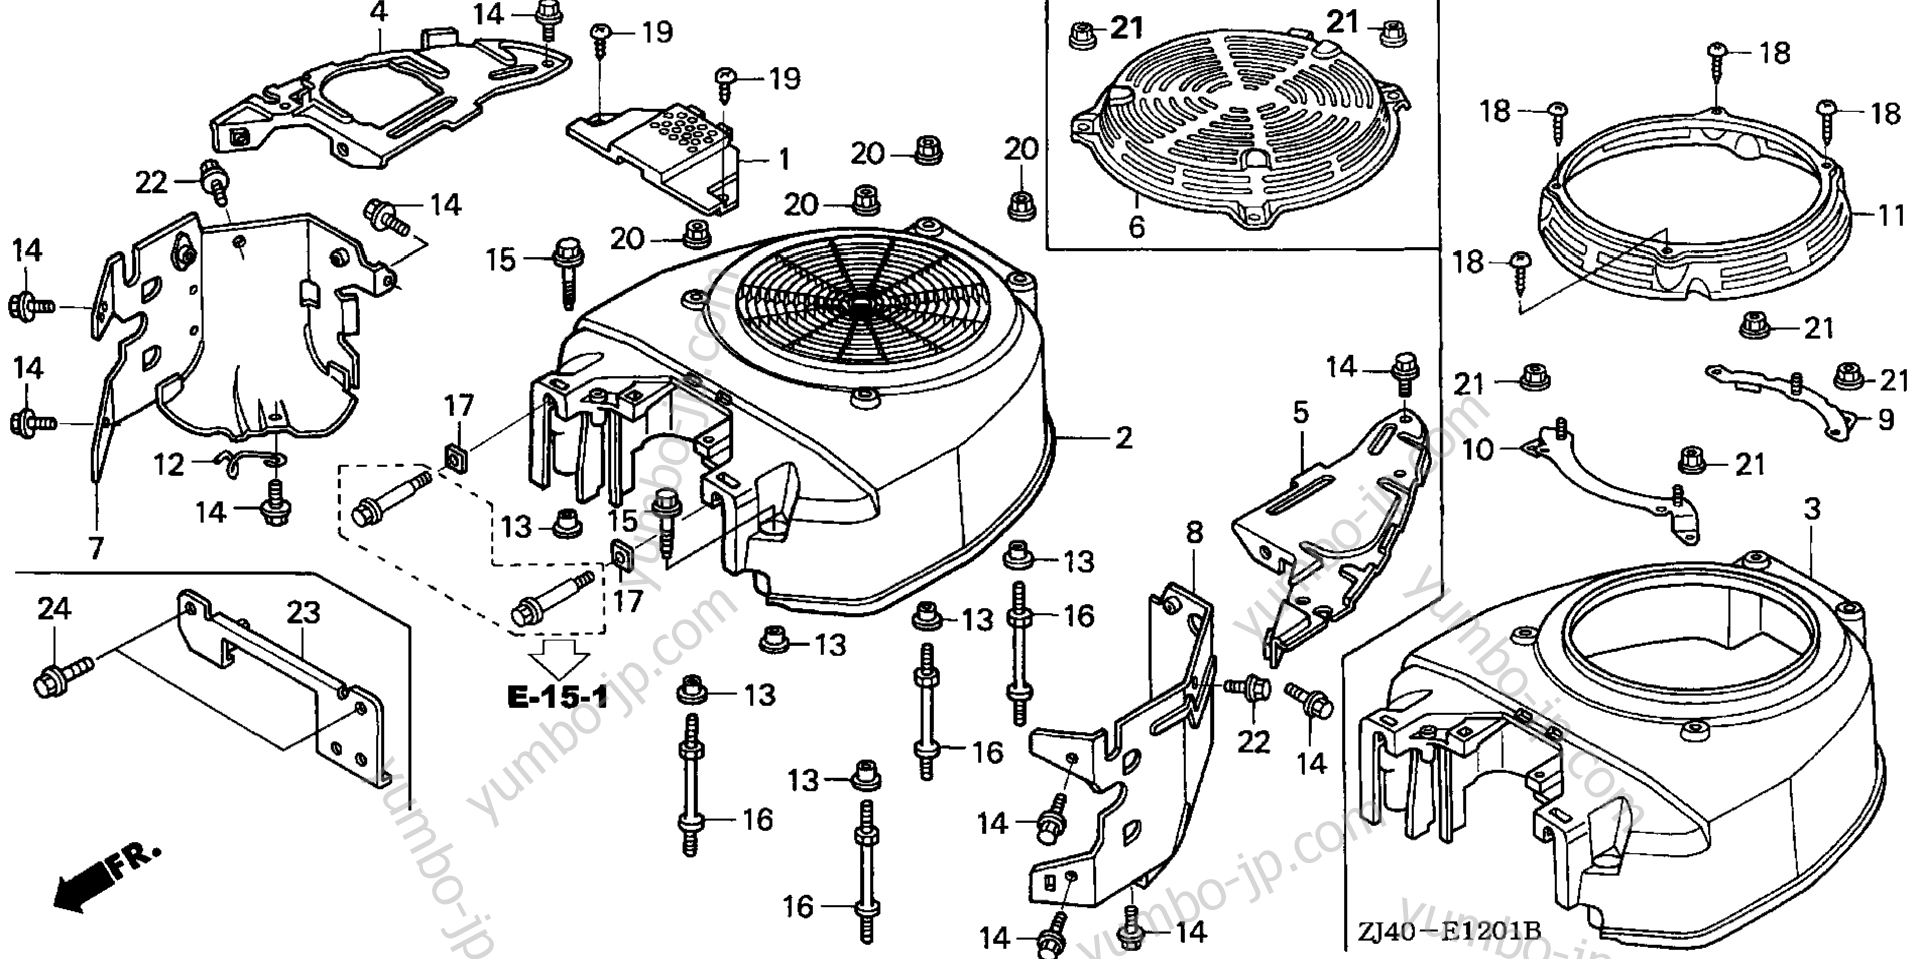 FAN COVER (2) for multi purpose engines HONDA GXV620K1 QYF/A 